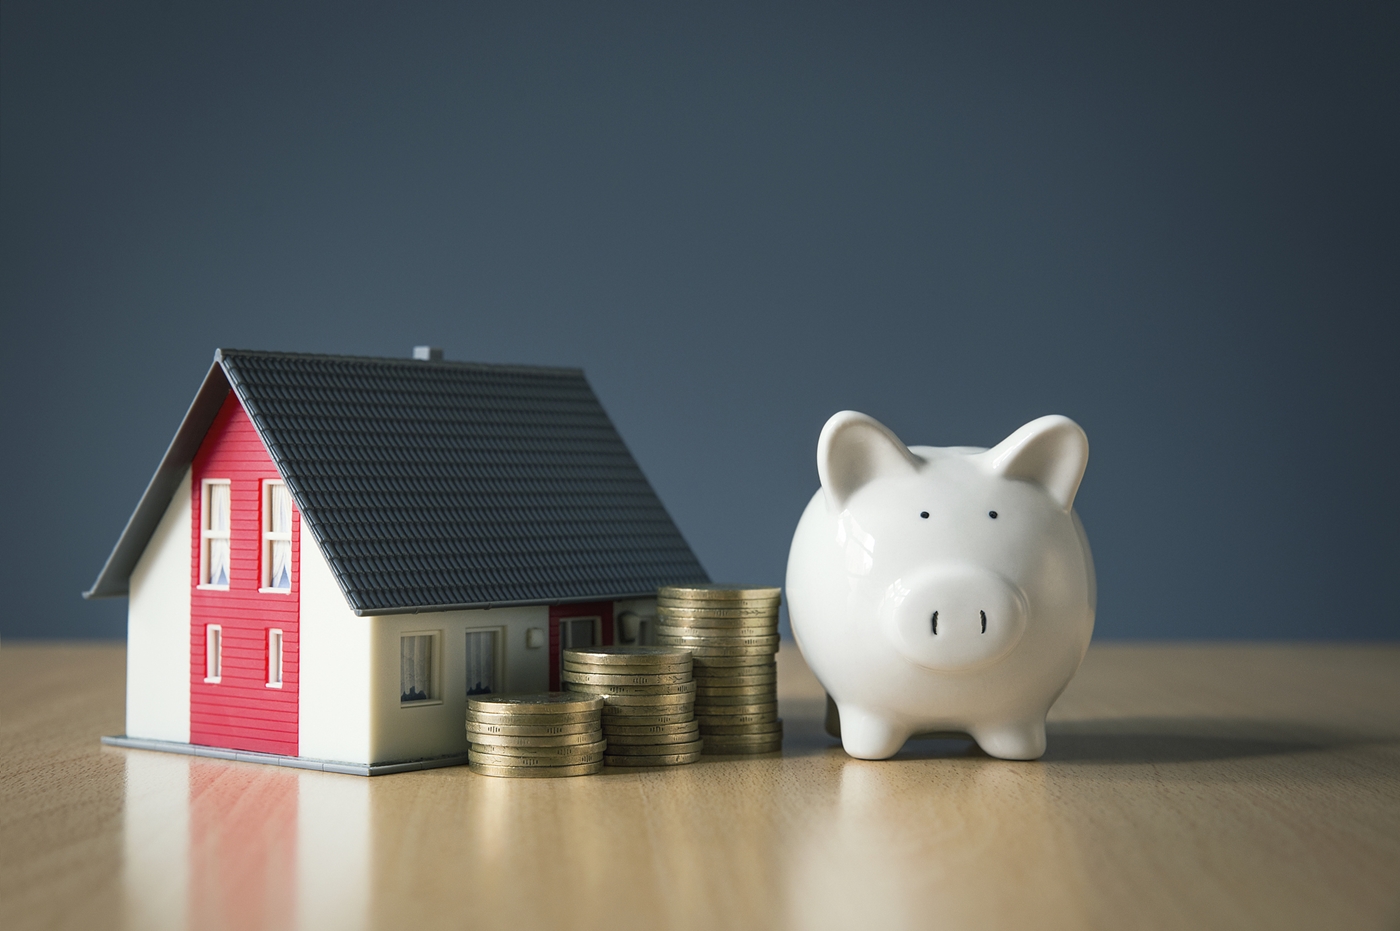 New First Home Savings Account launches April 1, but won’t be available until later this year